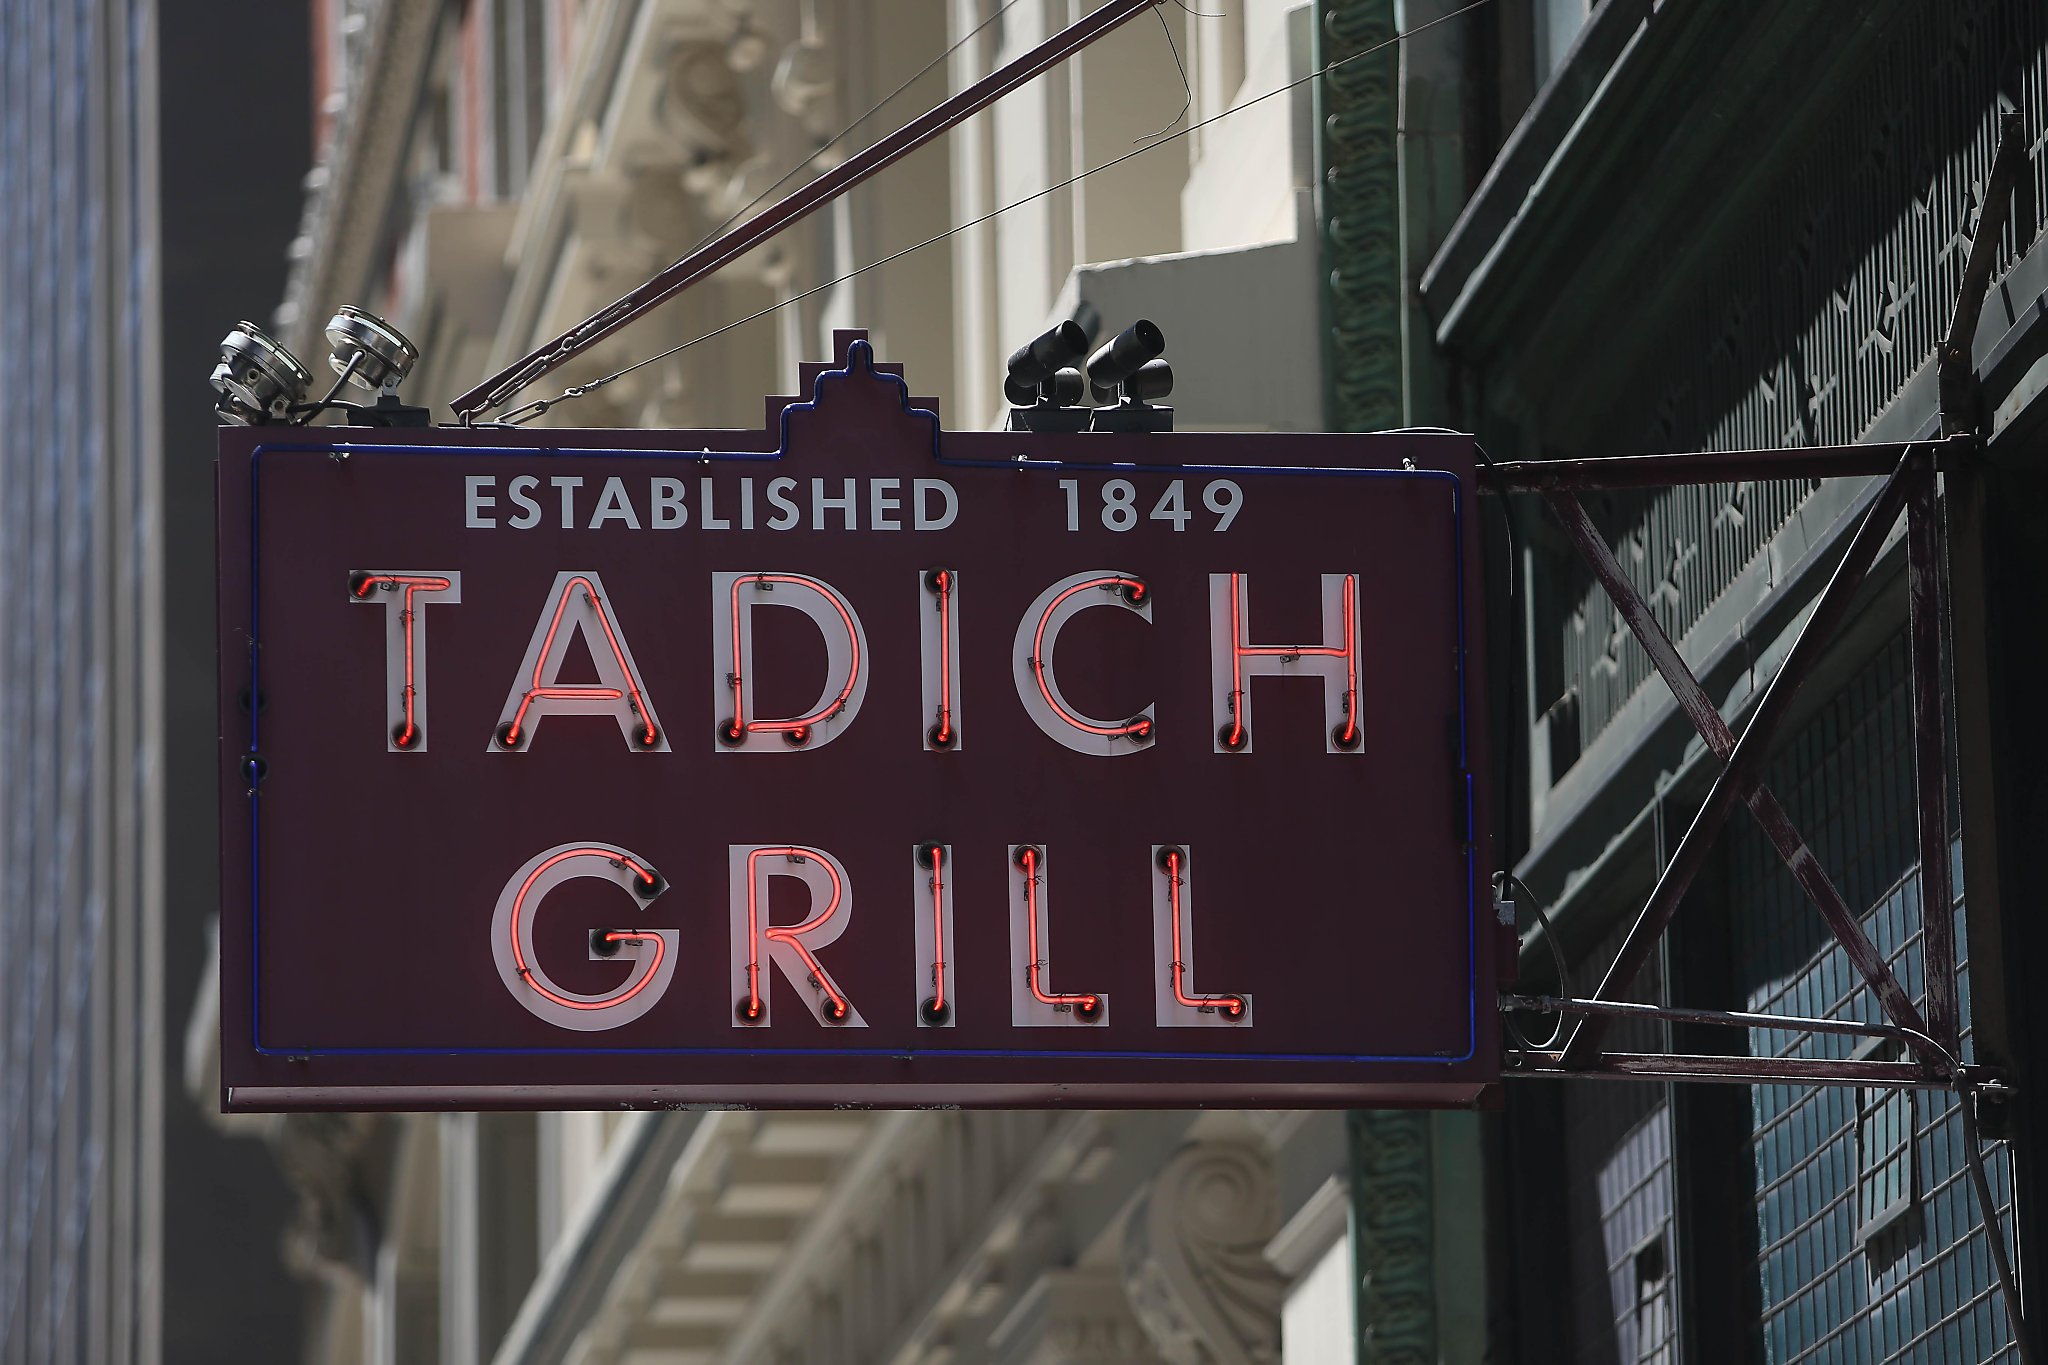 Historic Tadich Grill in SF wins “lifeline” with new funding from controversial Barstool Sports